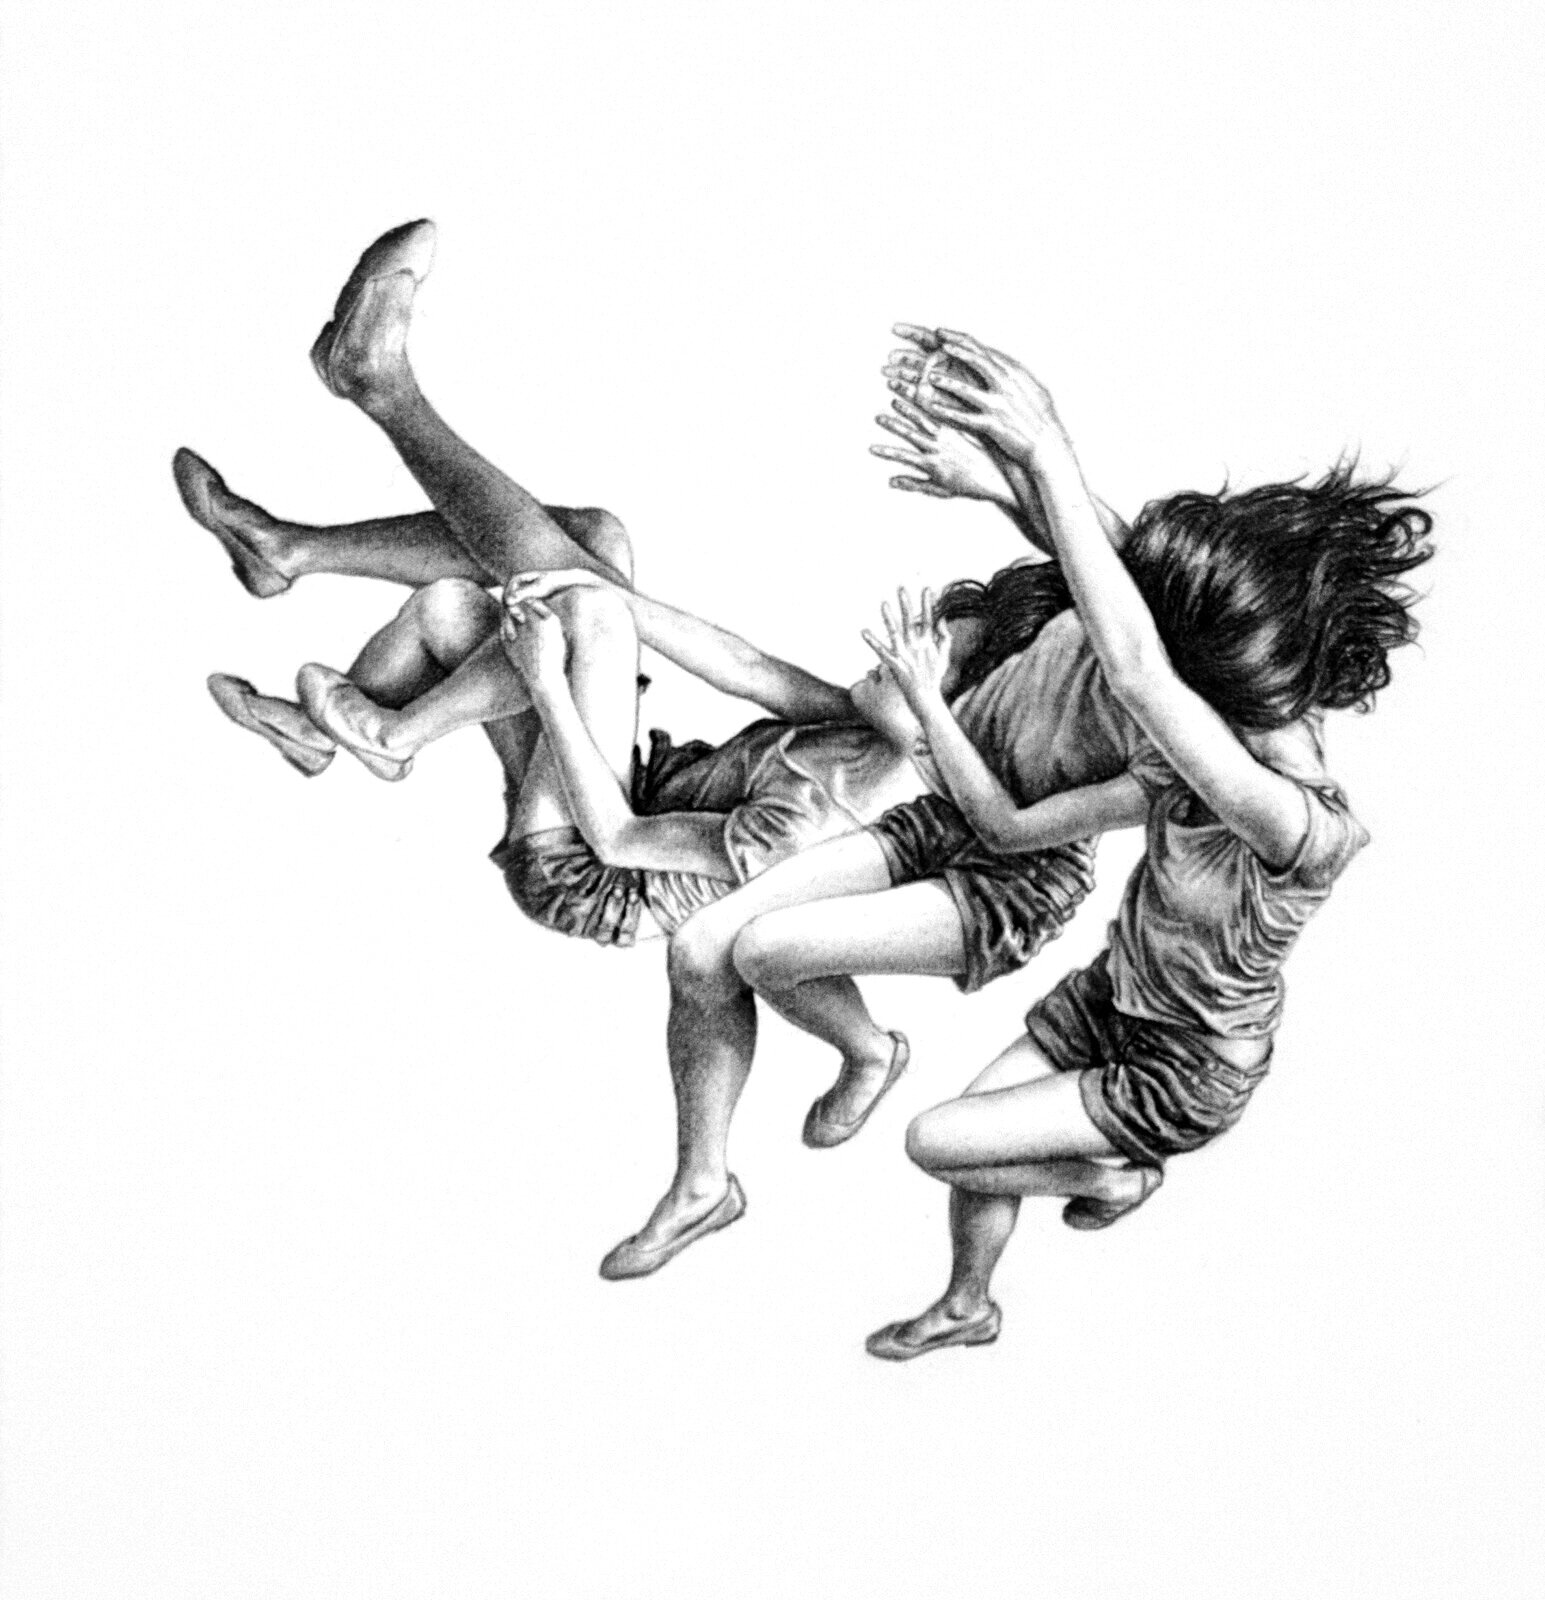 SPUR - SOLD | 5 X 5 INCHES | GRAPHITE AND INK ON PAPER | 2012